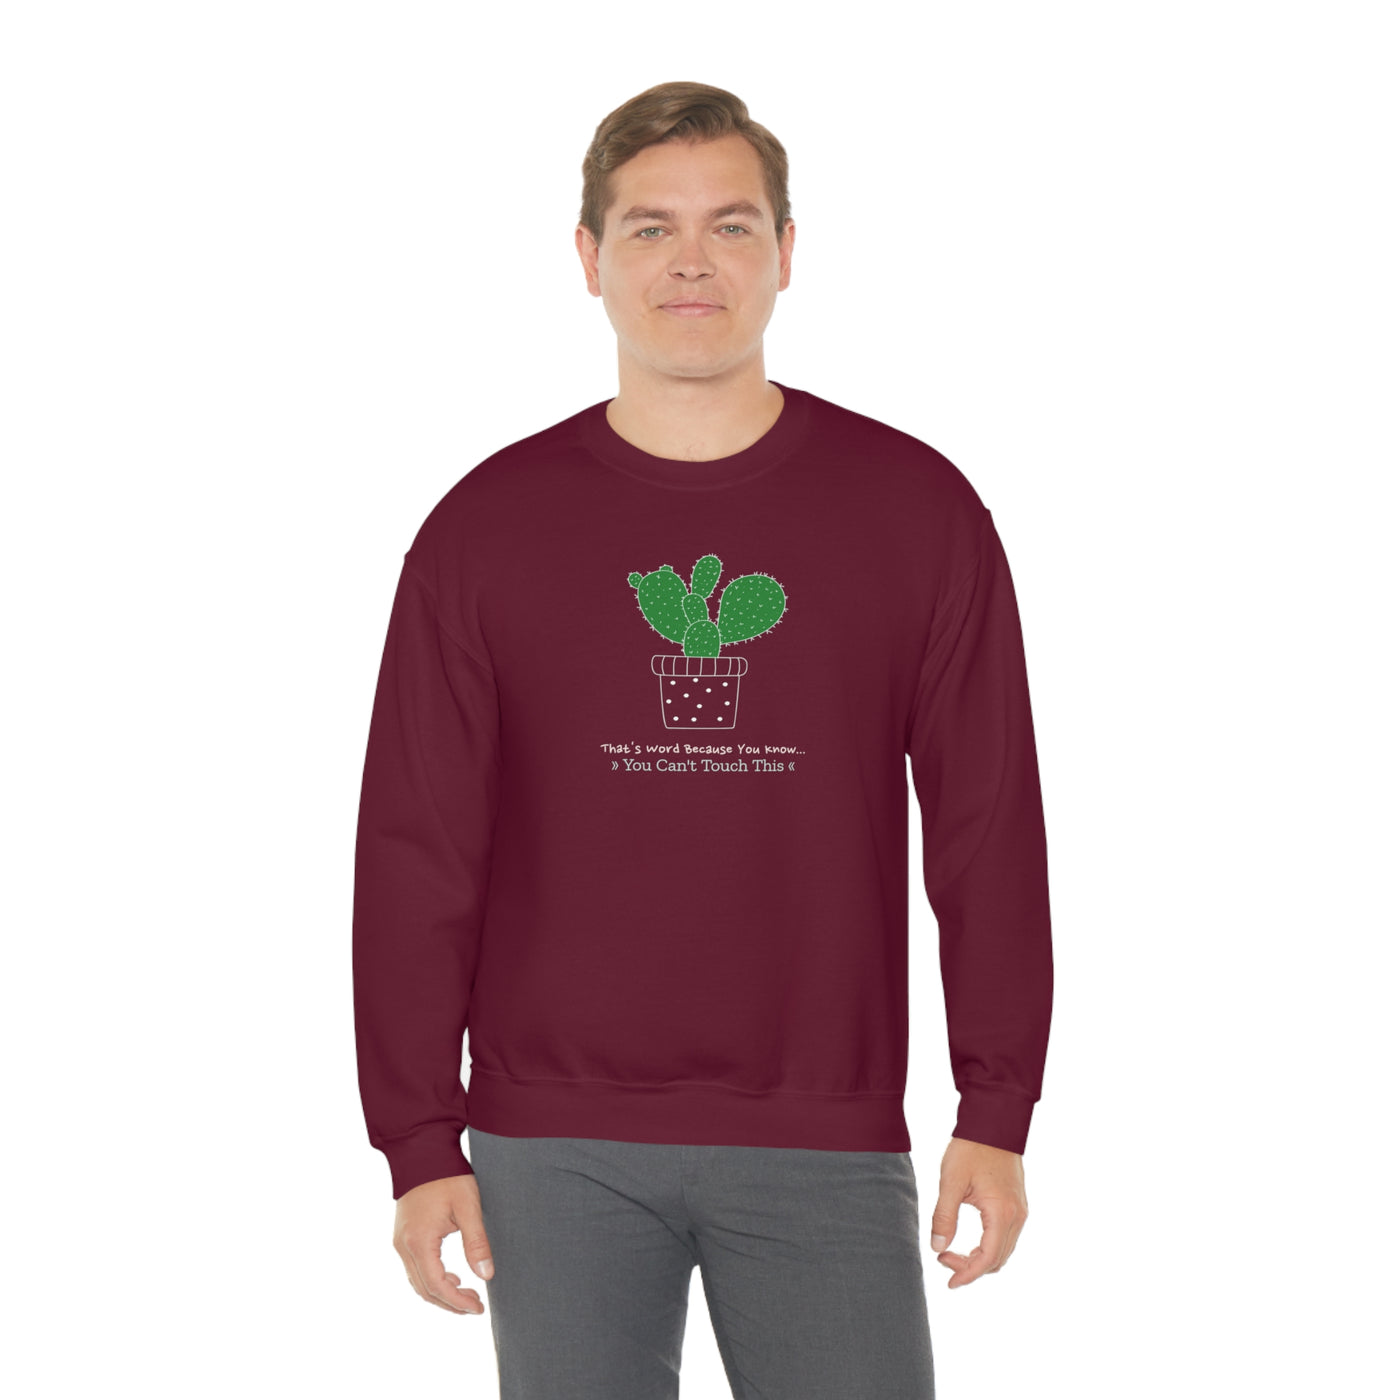 That's Word Because You Know...You Can't Touch This Crewneck Sweatshirt